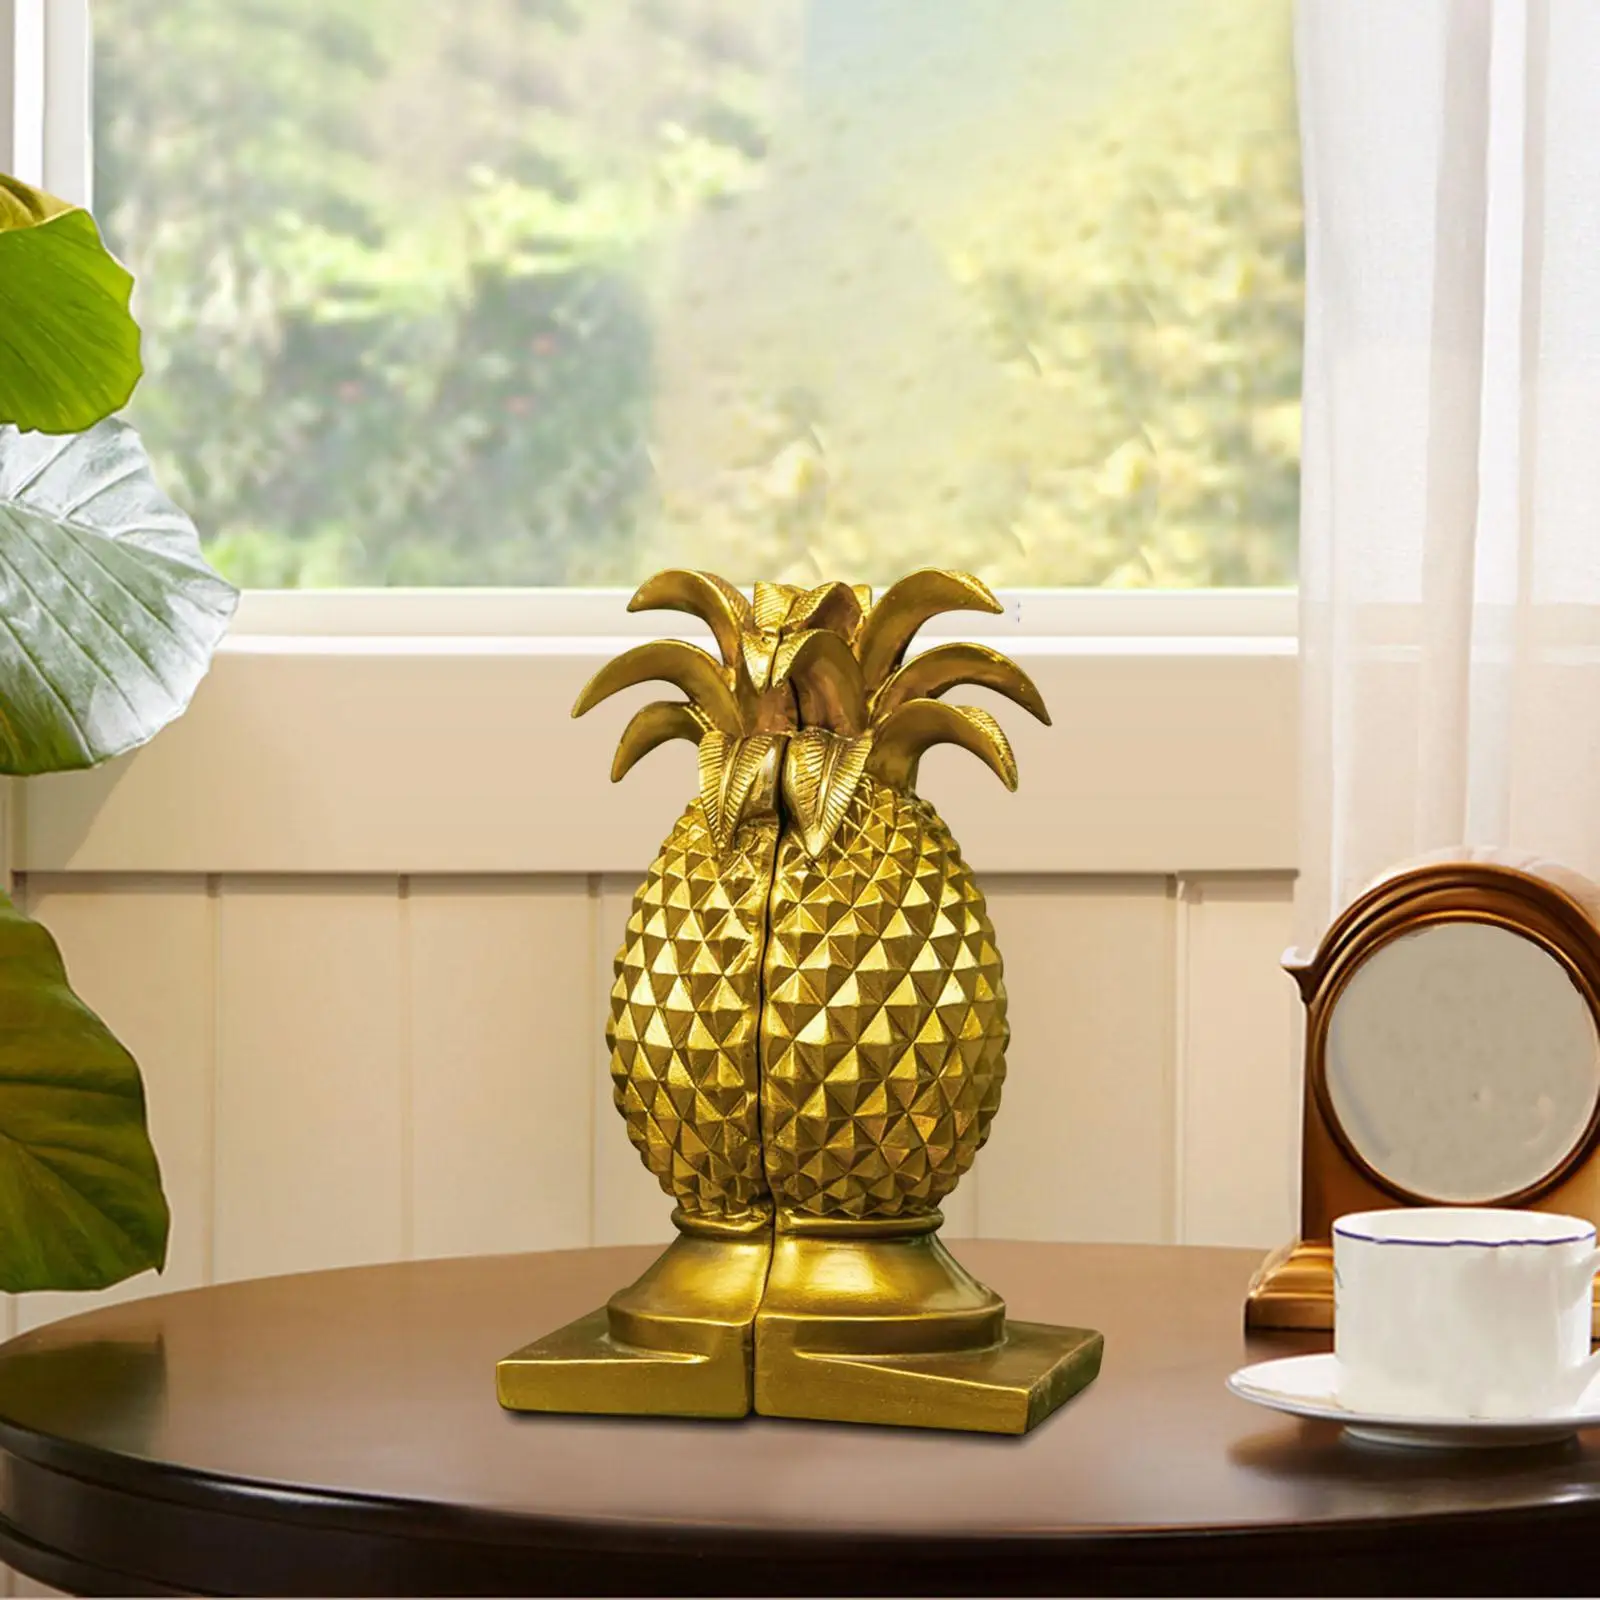 Set of 2 Golden Pineapple Figurine Resin Bookends, Decorative Stylish Bookshelf Accessories for Home Office Cute Hawaiian Statue